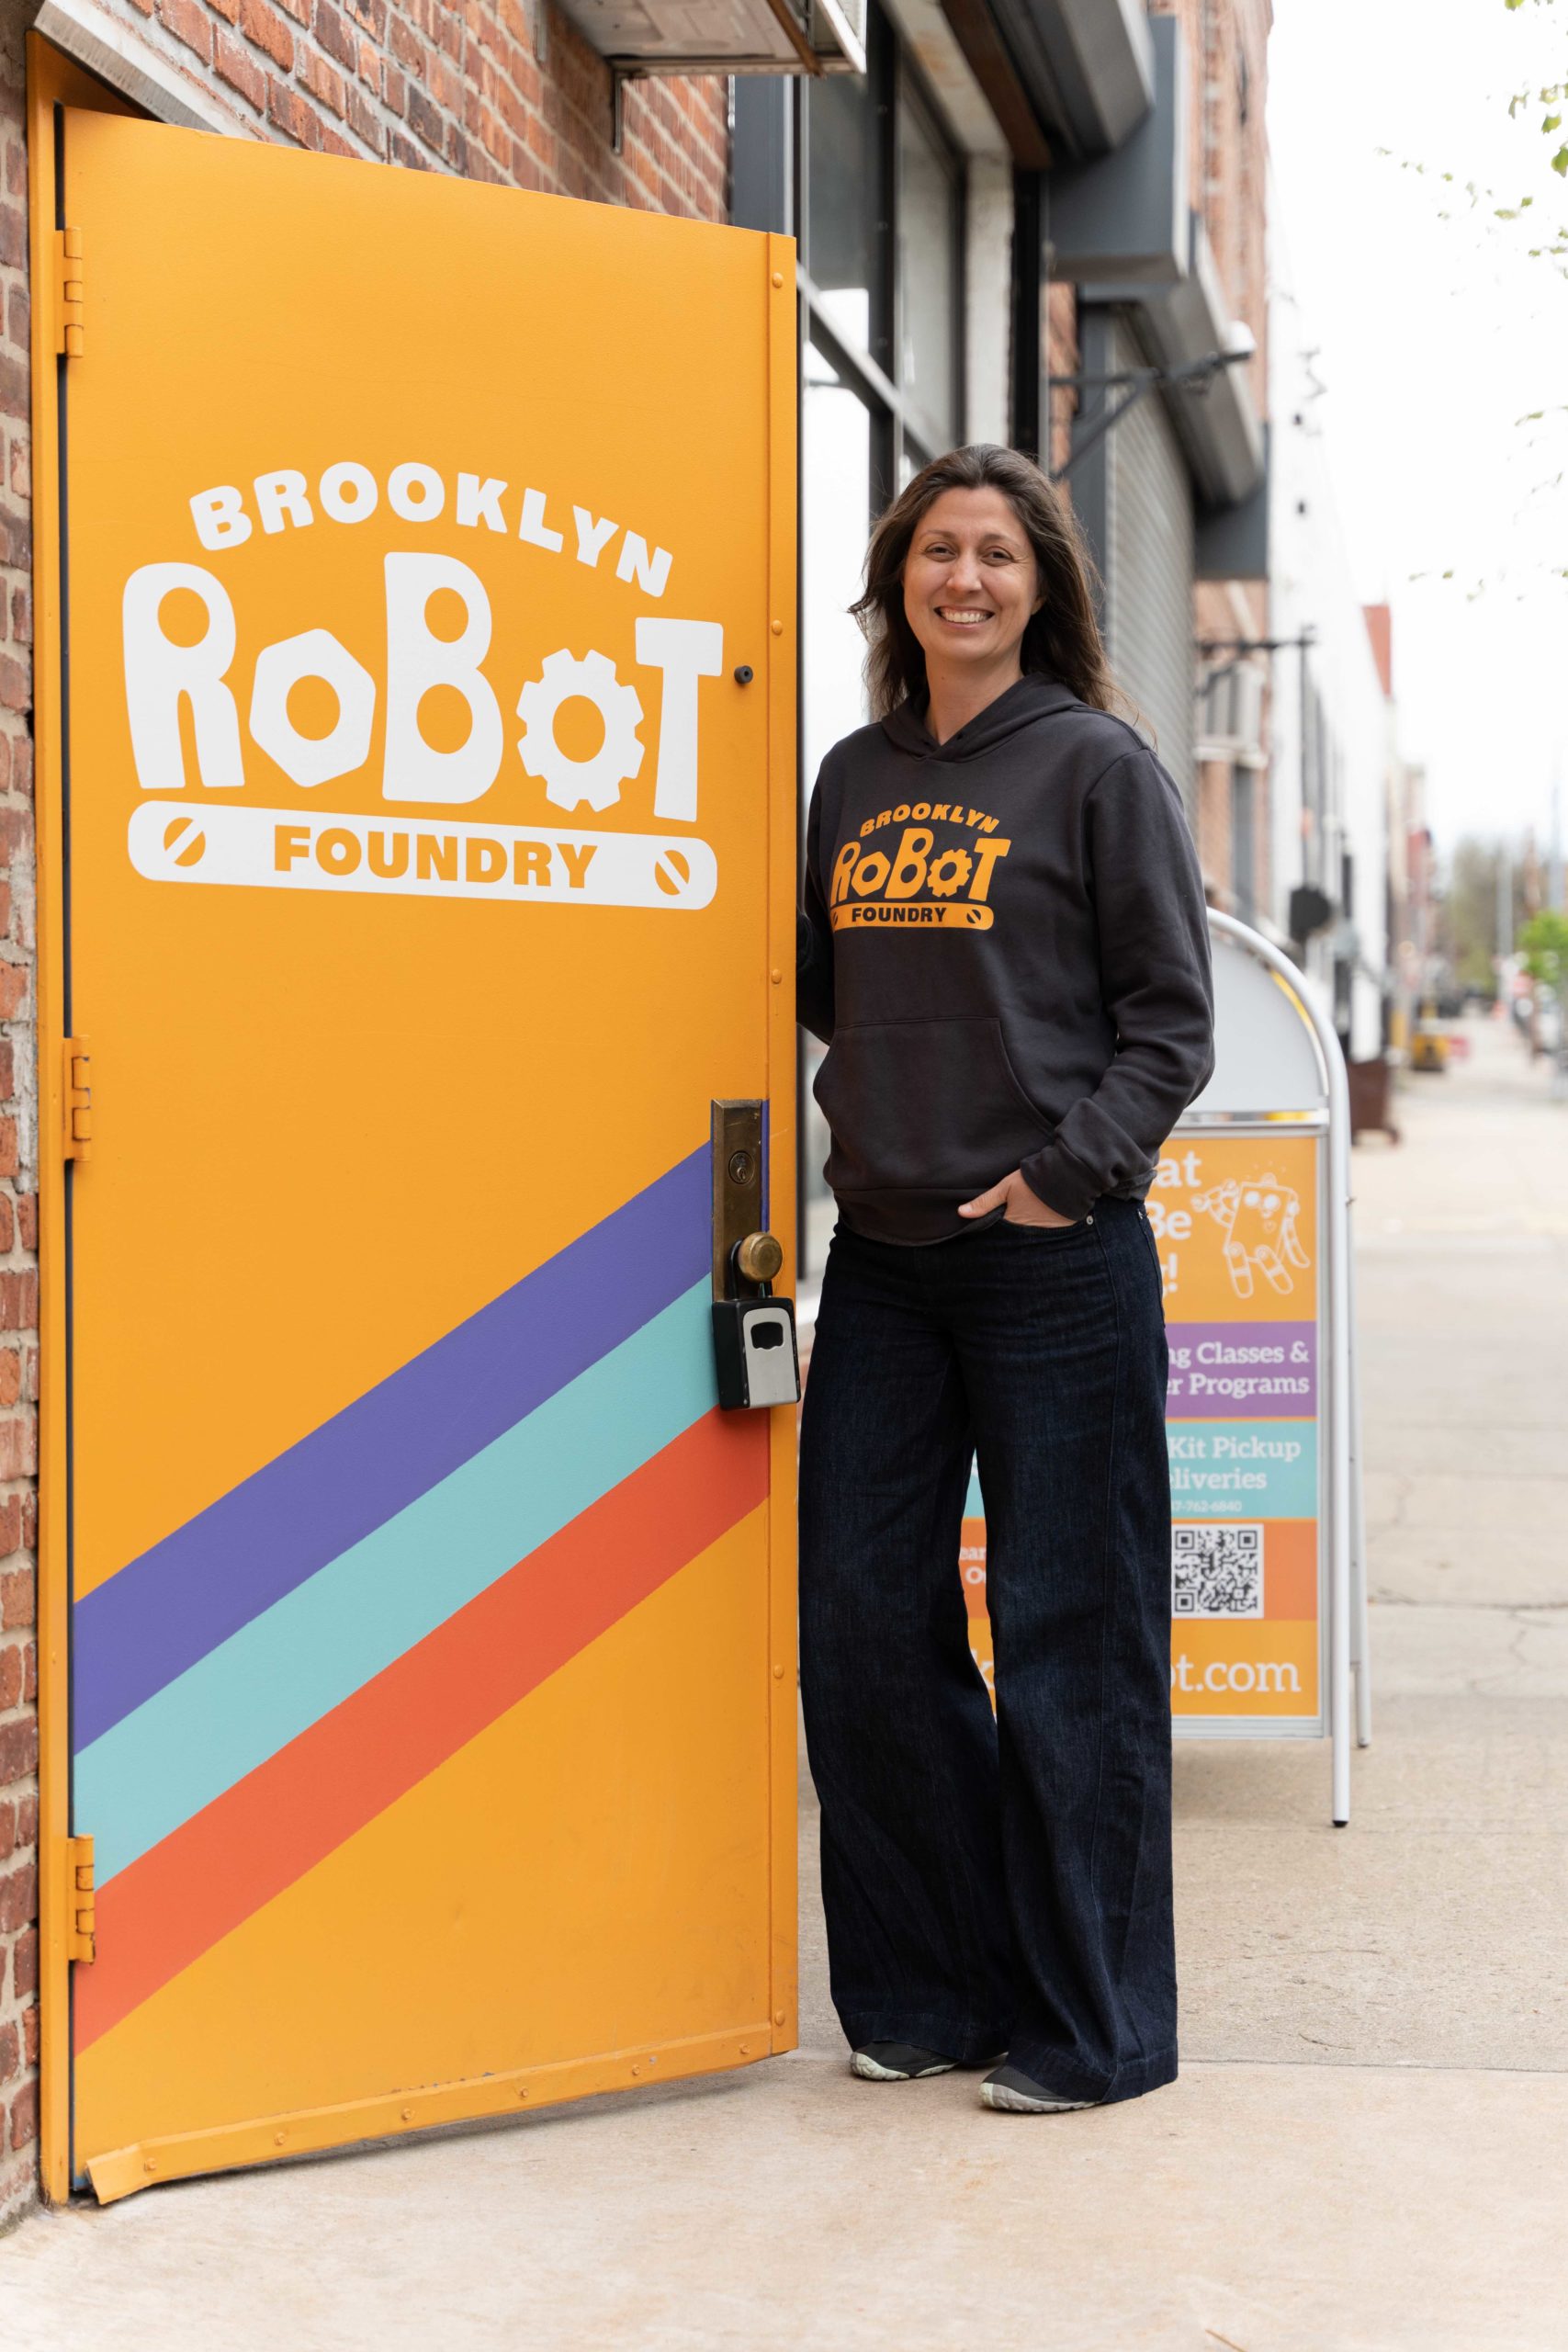 Profile picture (full body) of Jenny Young. She is wearing a grey Brooklyn Robot Foundry sweatshirt and dark pants, standing outside of the orange Brooklyn Robot Foundry door. The blurred city block is behind.